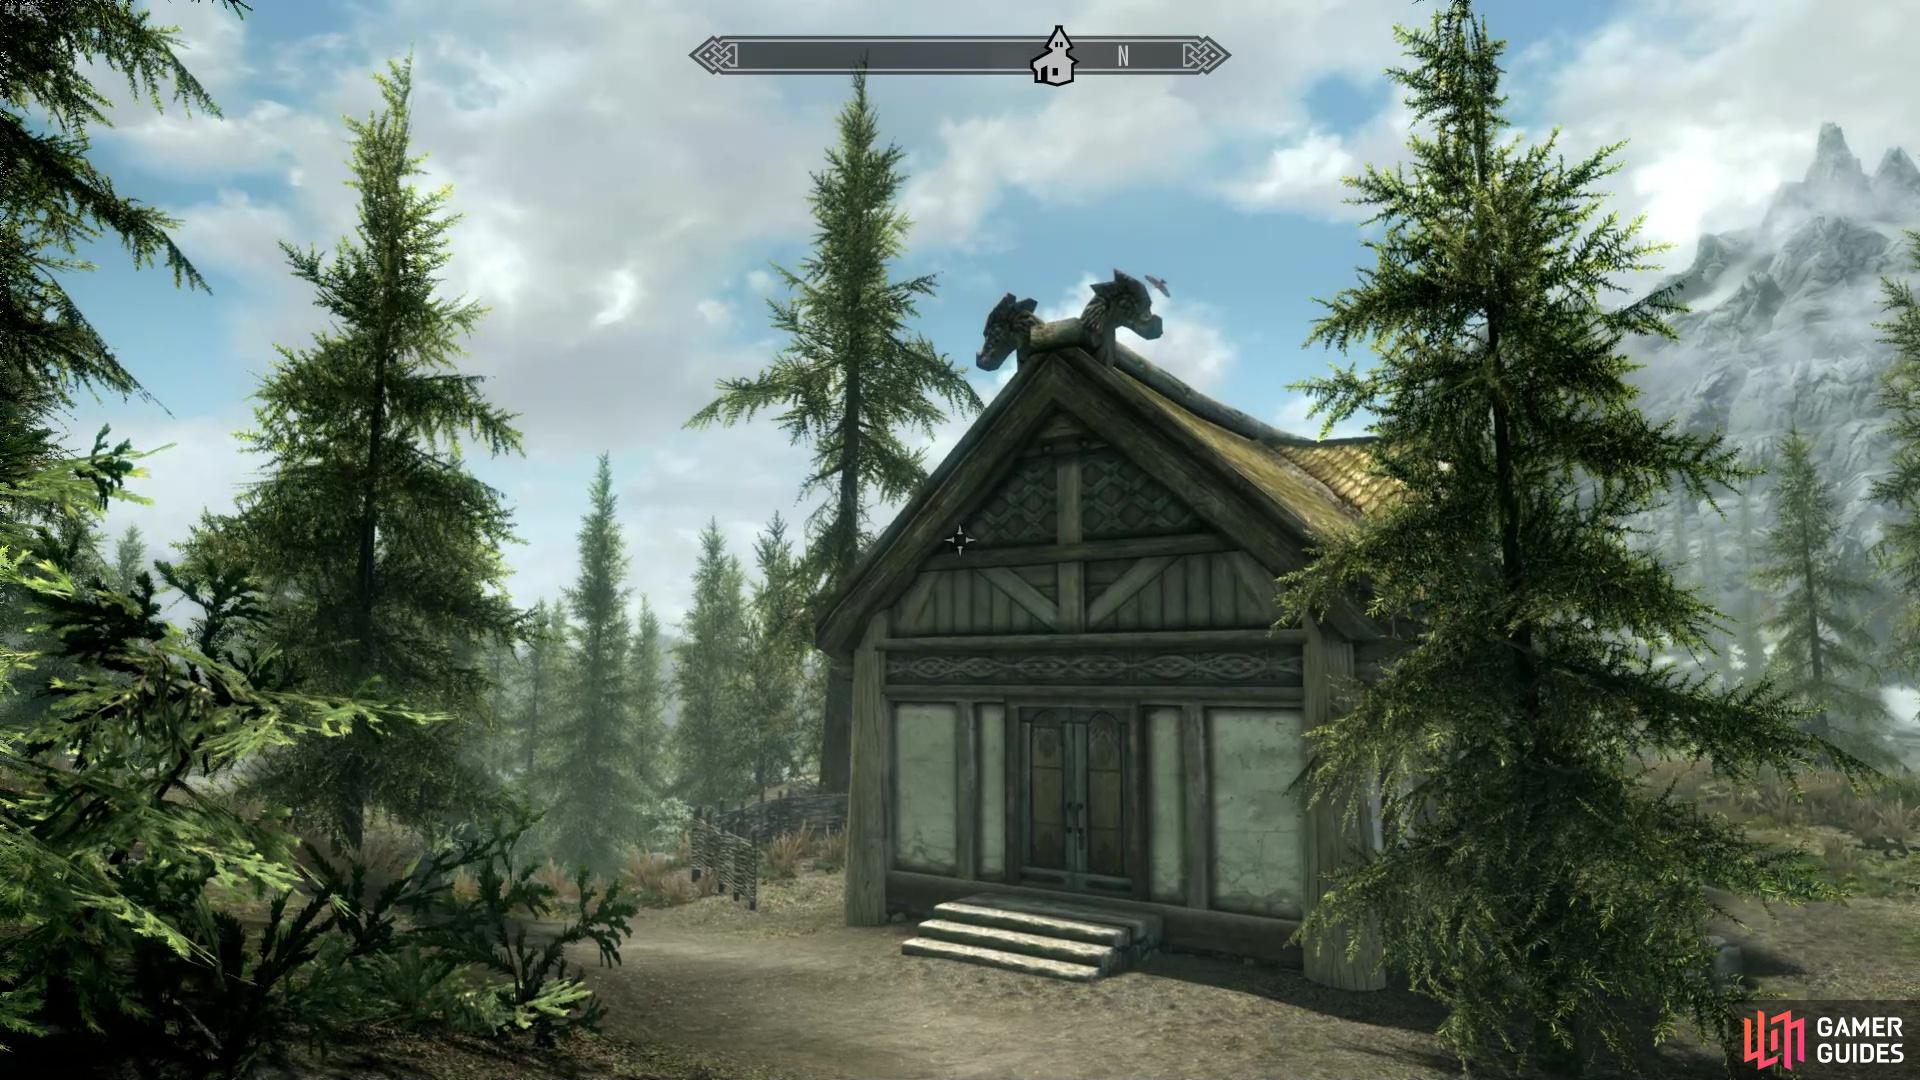 The Small House is a modest abode, but it could do nicely for an adventurer who prefers to be out all day and night!